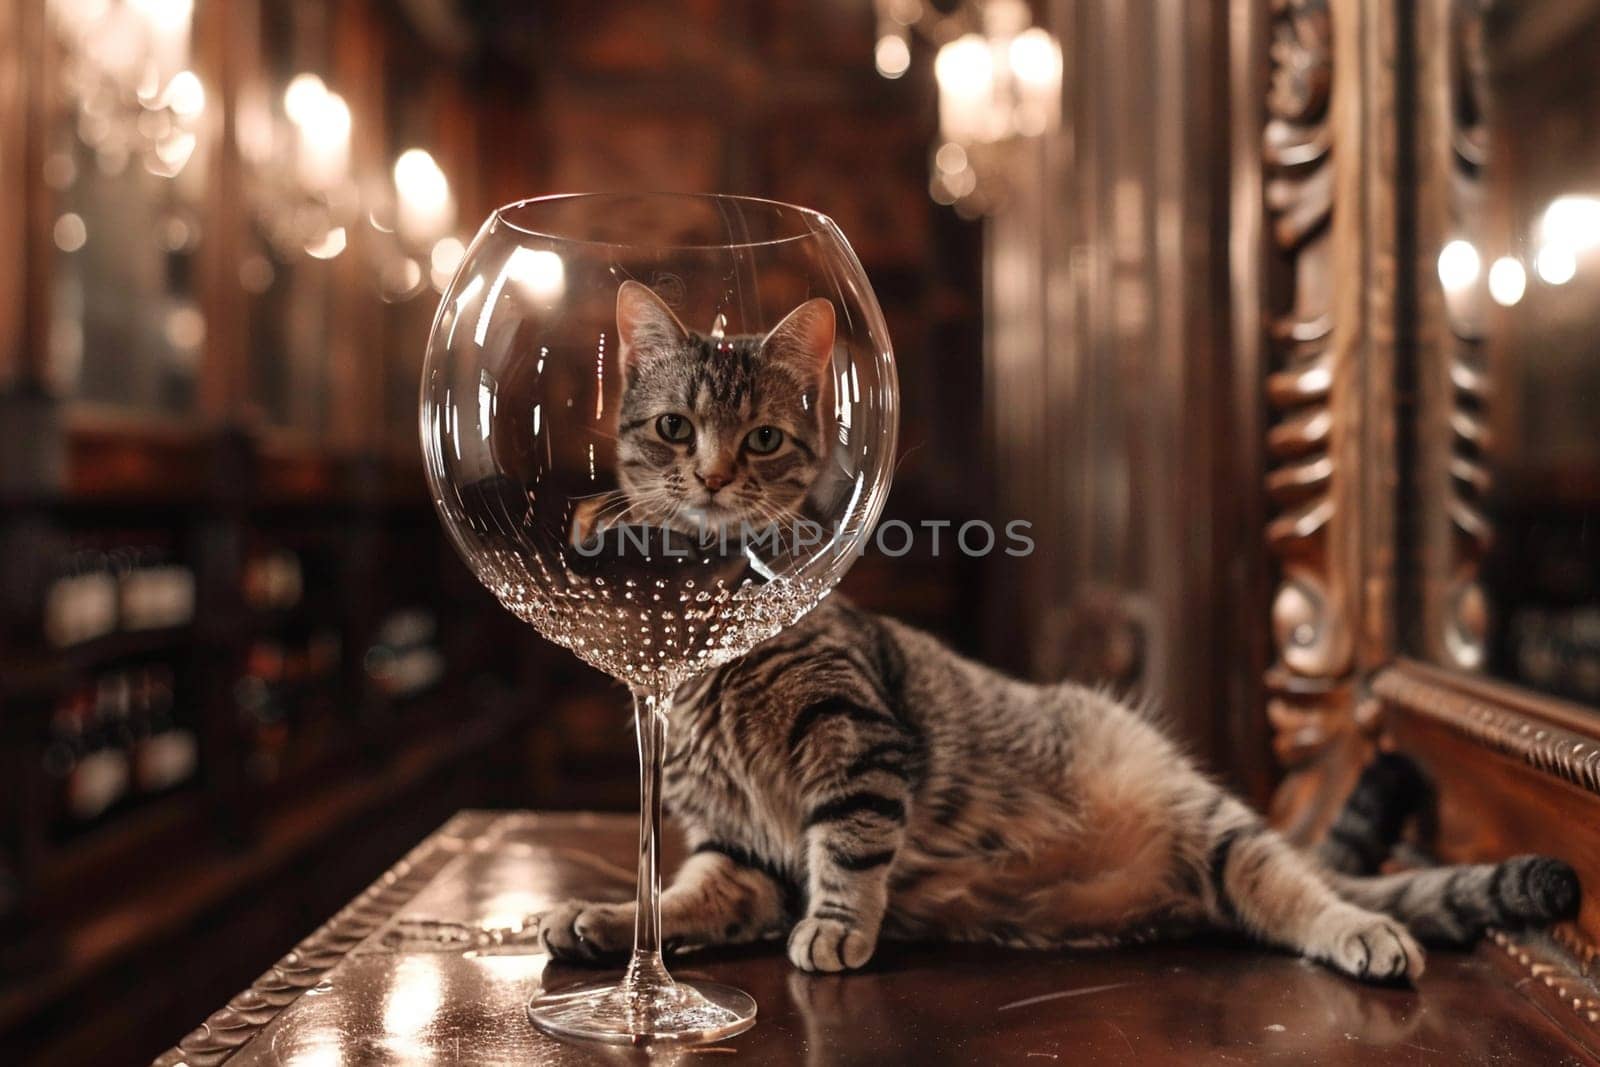 Charming image of a striped cat relaxing near an oversized wine glass in a warmly lit bar setting, symbolizing unexpected pet moments.